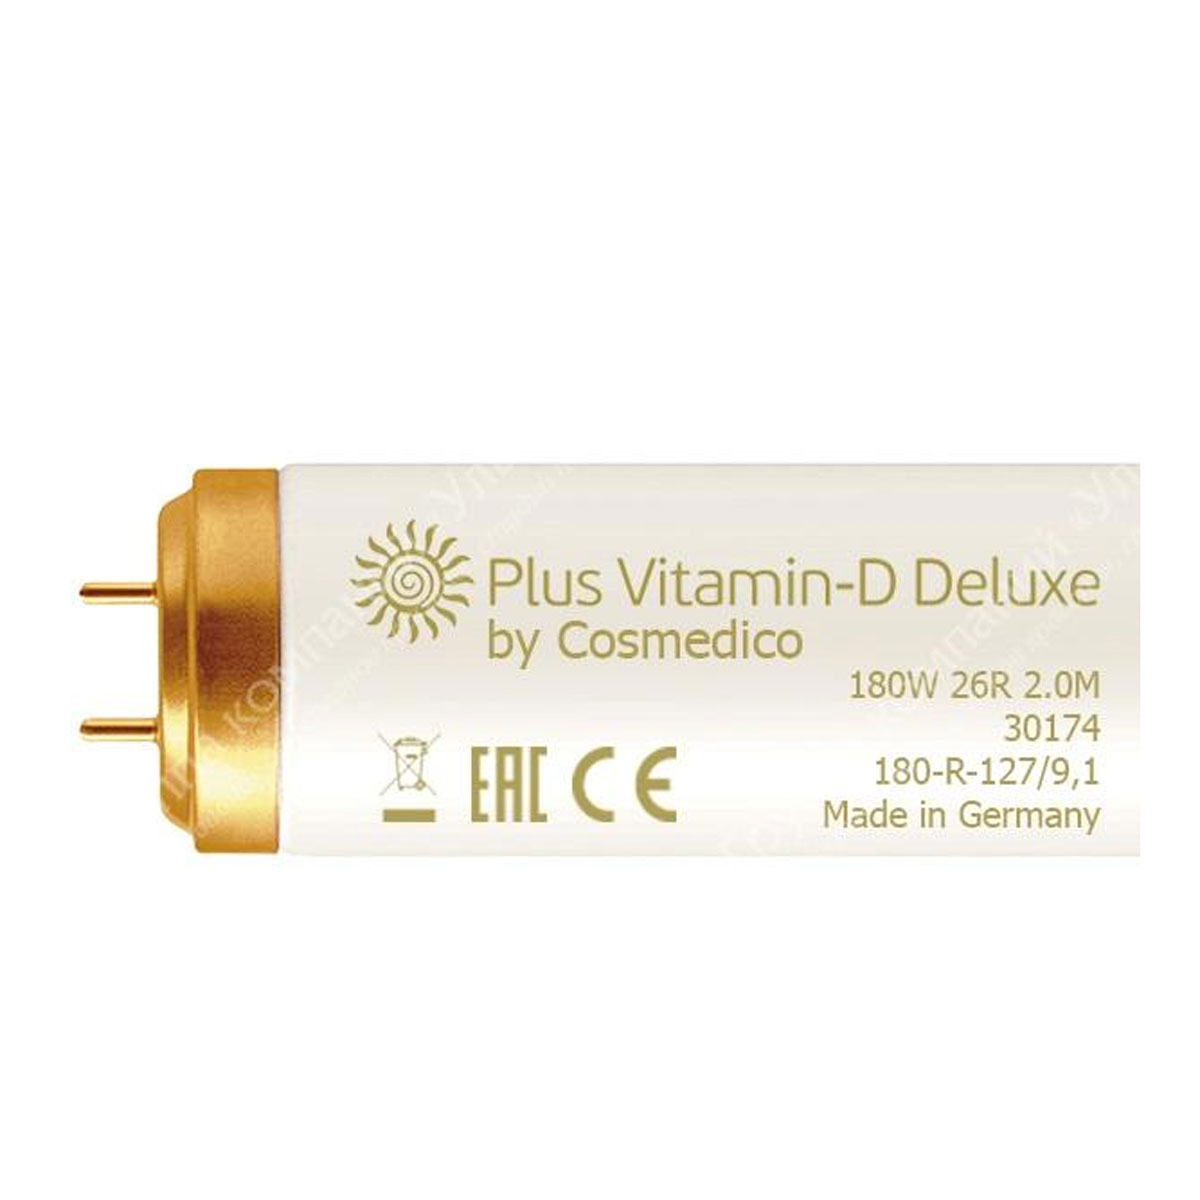 Plus Vitamin-D Deluxe 26R 180W by Cosmedico